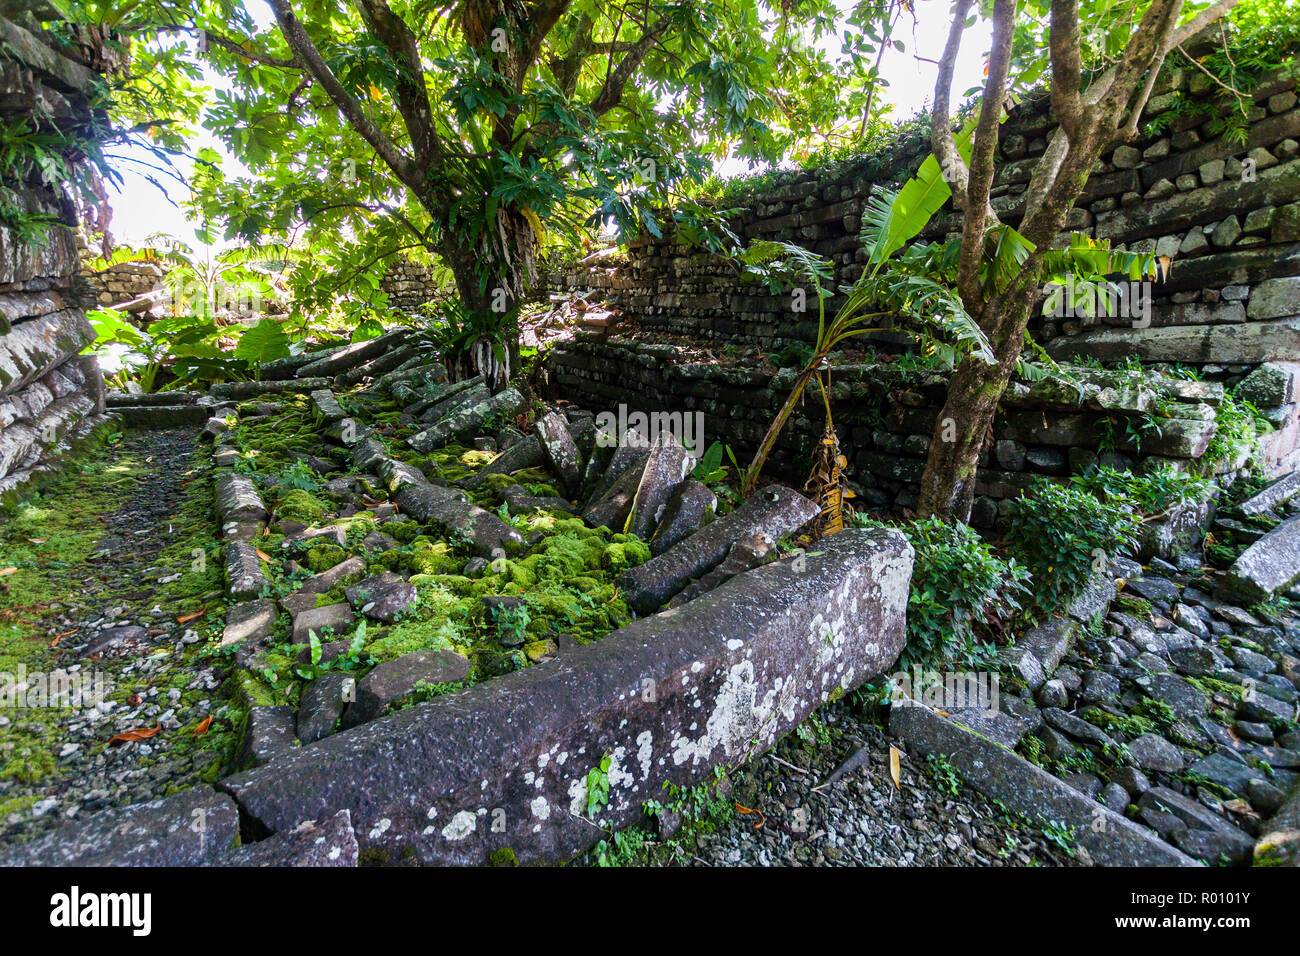 A Lonely tree inside Nan Madol central Nandauwas part: walls, and moat made of large basalt slabs, ruins in the jungle, Pohnpei, Micronesia, Oceania Stock Photo